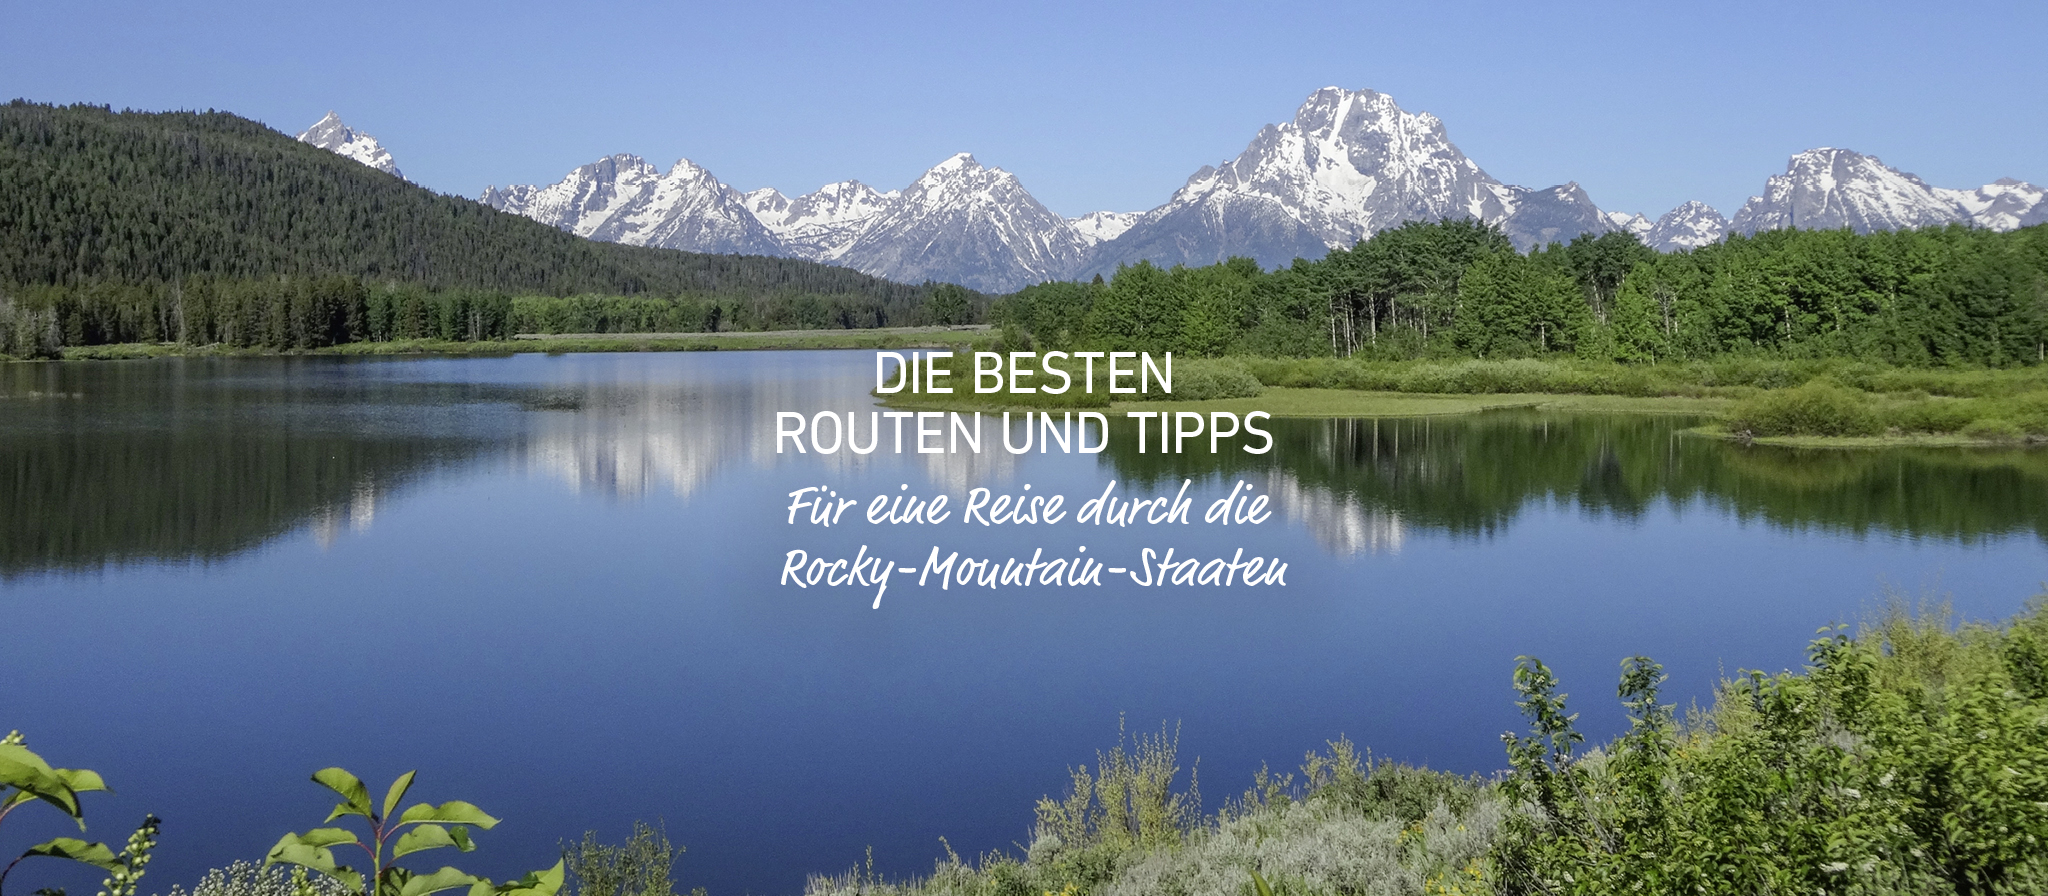 allgemein/homepage-elemente/banner/19banner-scenic-routes_Rocky_Mountain_and_the_Great_Plain-route